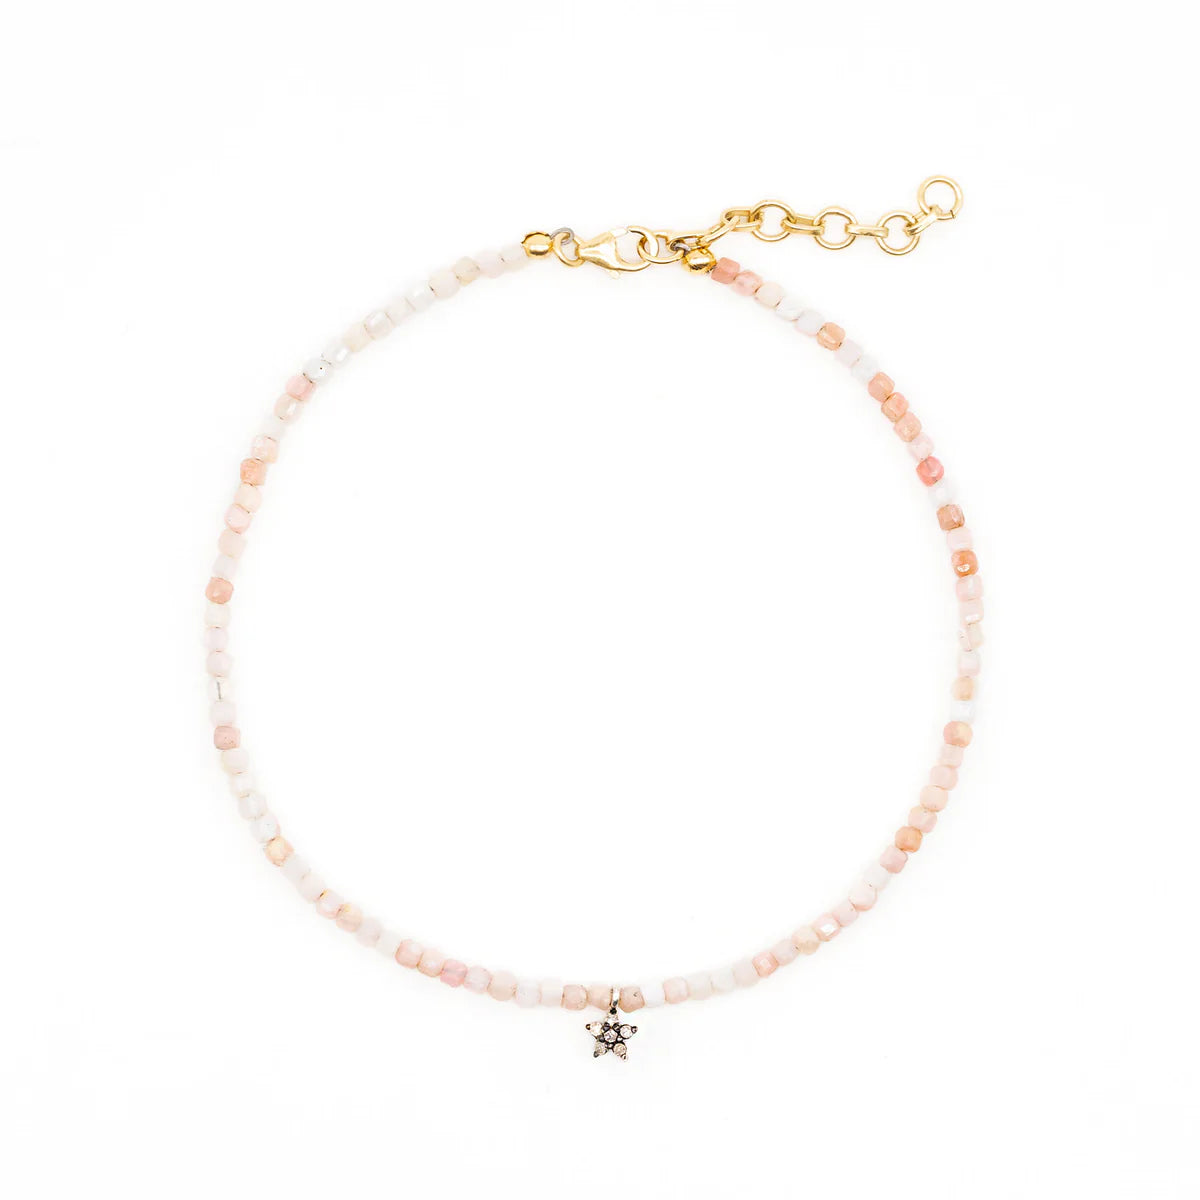 pink-opal-anklet-product-shot_1200x.webp__PID:85558855-b1c2-449f-9b80-17a08470ae30